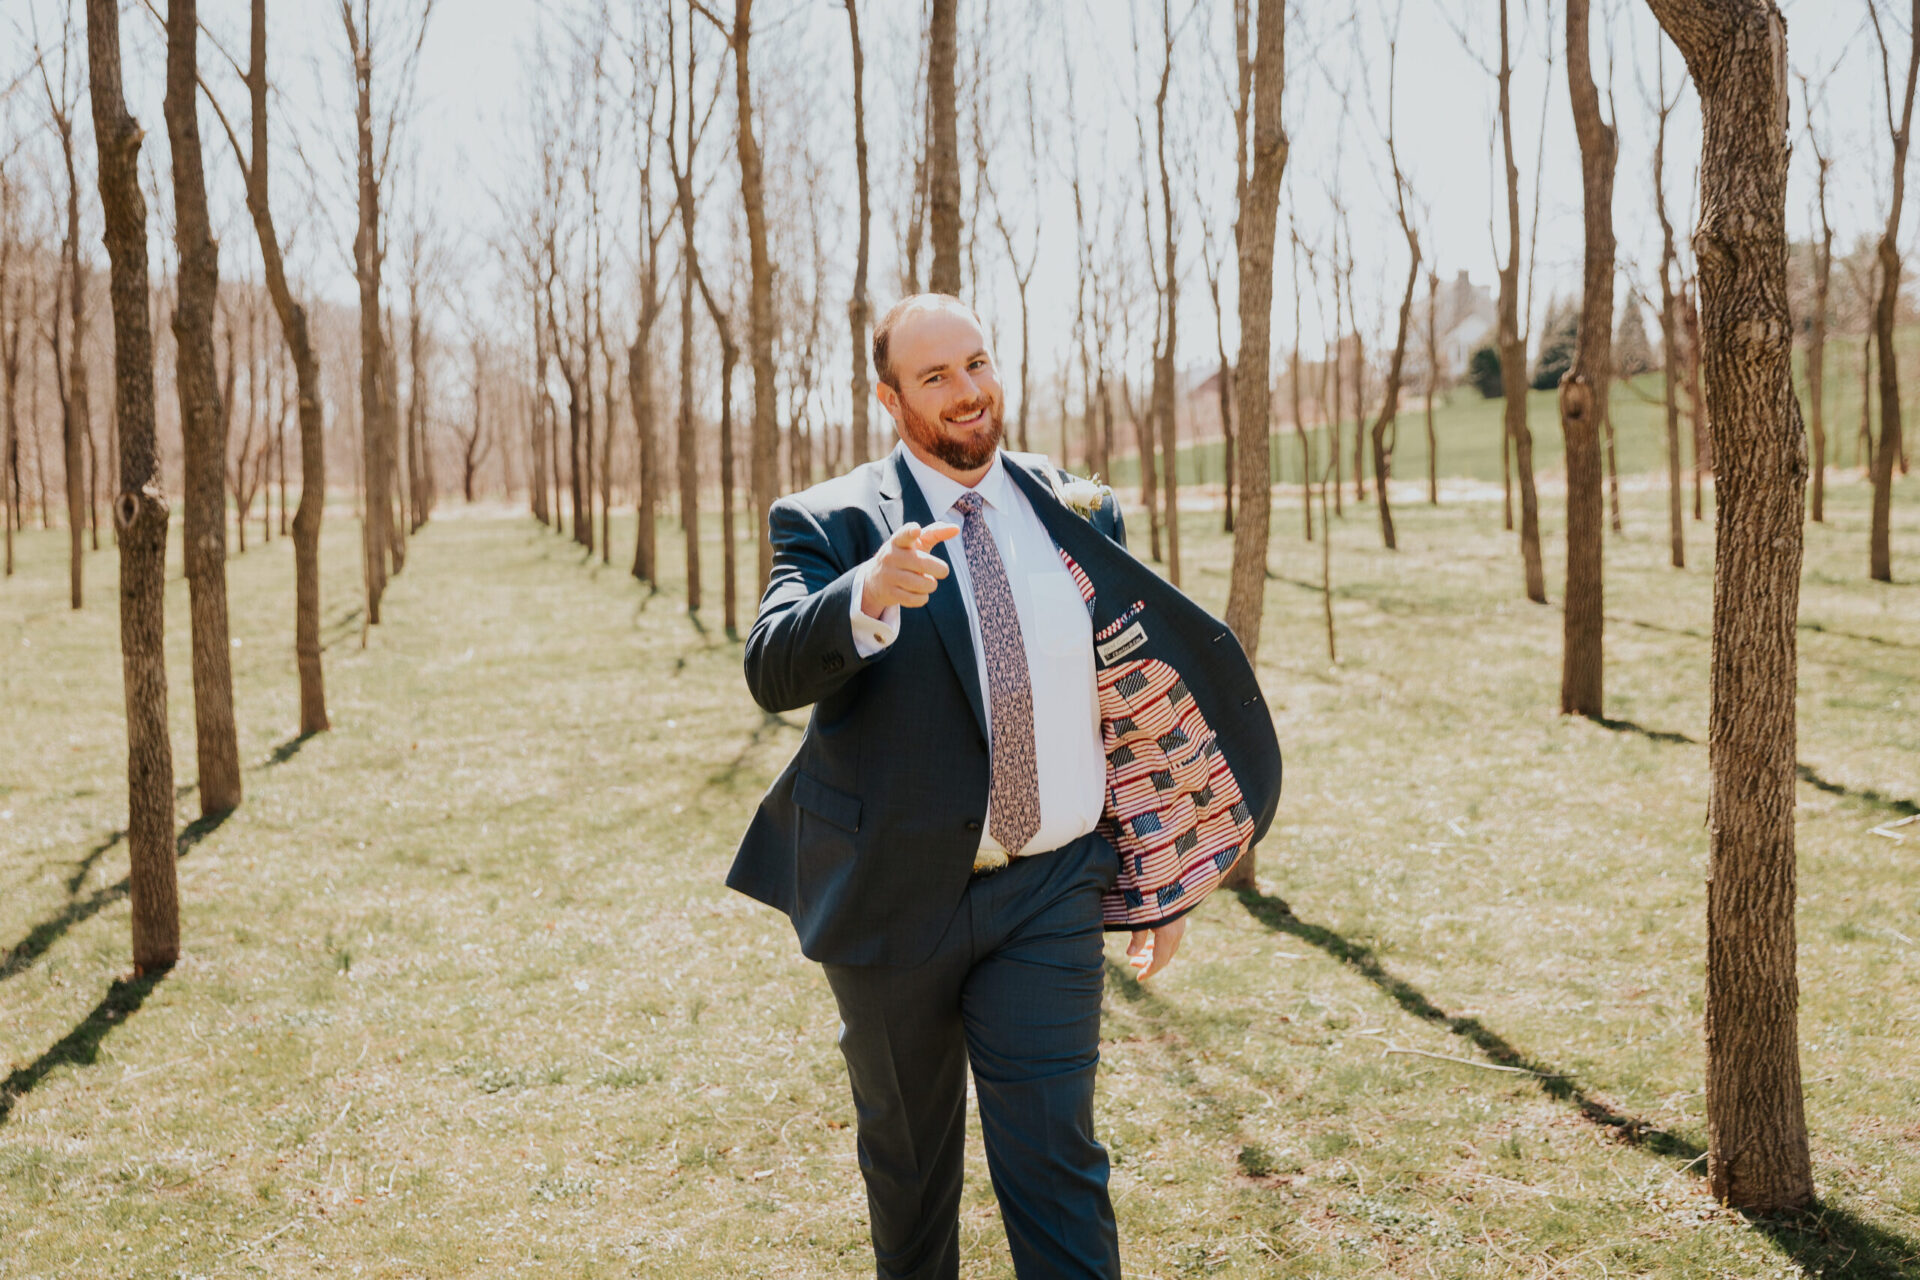 Zion Springs groom in walnut grove with American flag suit